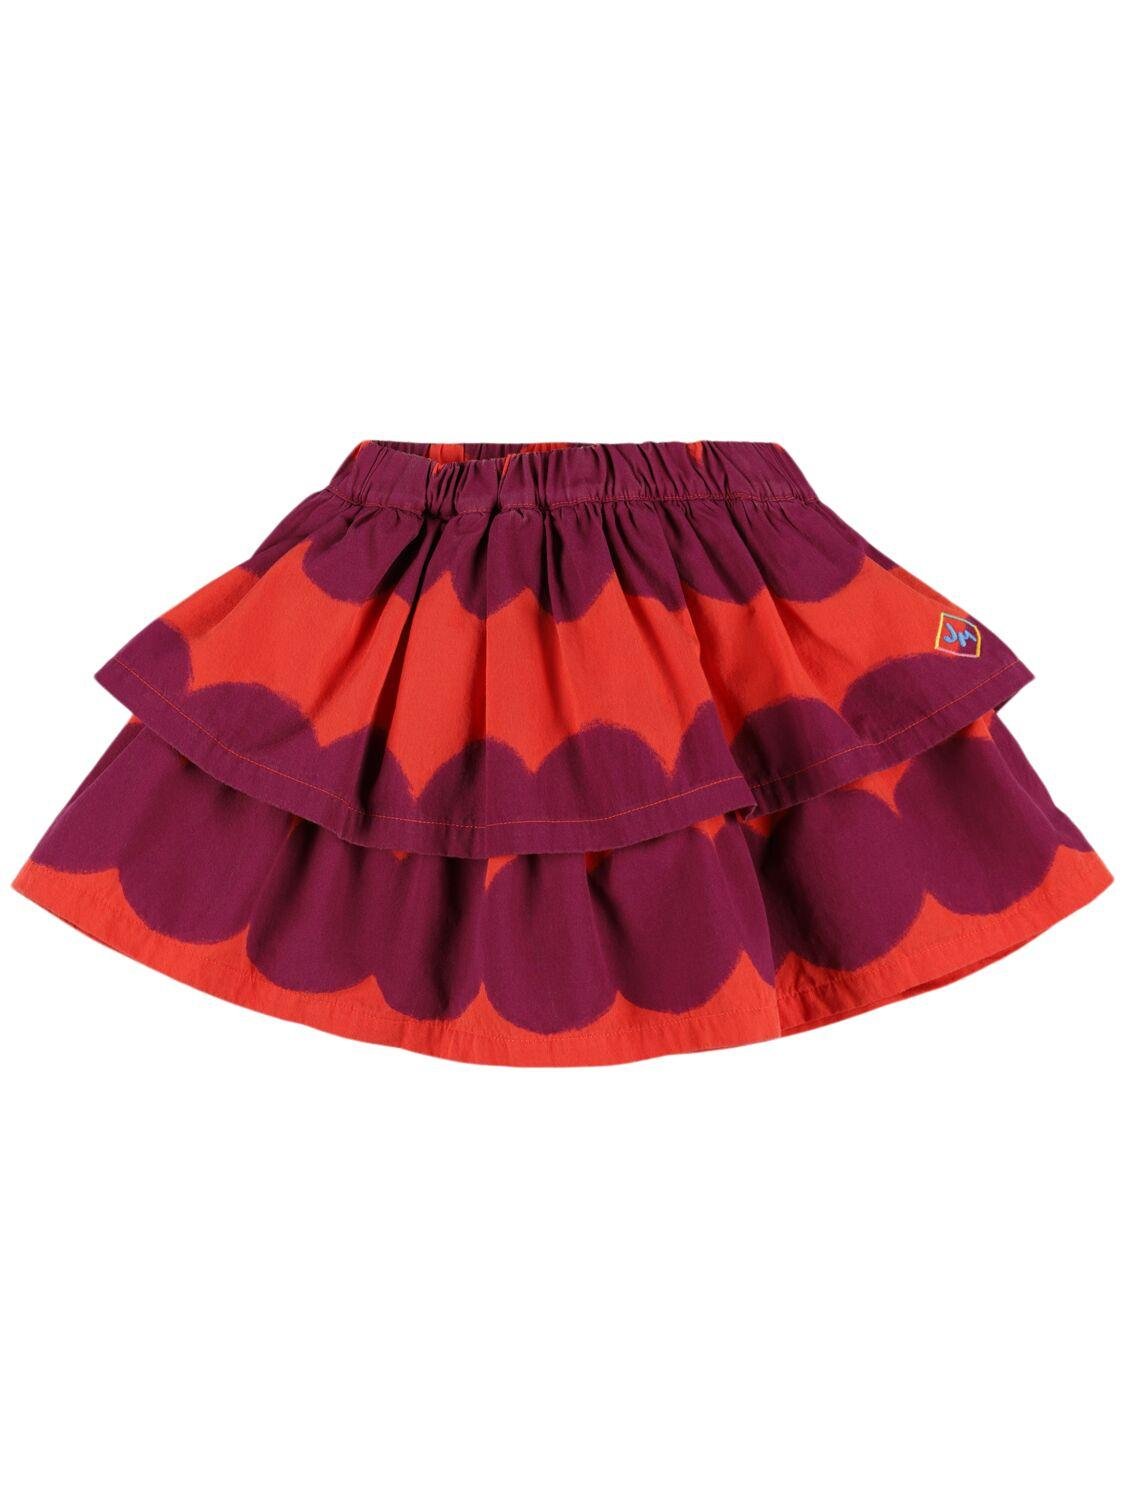 Tiered Cotton Skirt by JELLYMALLOW